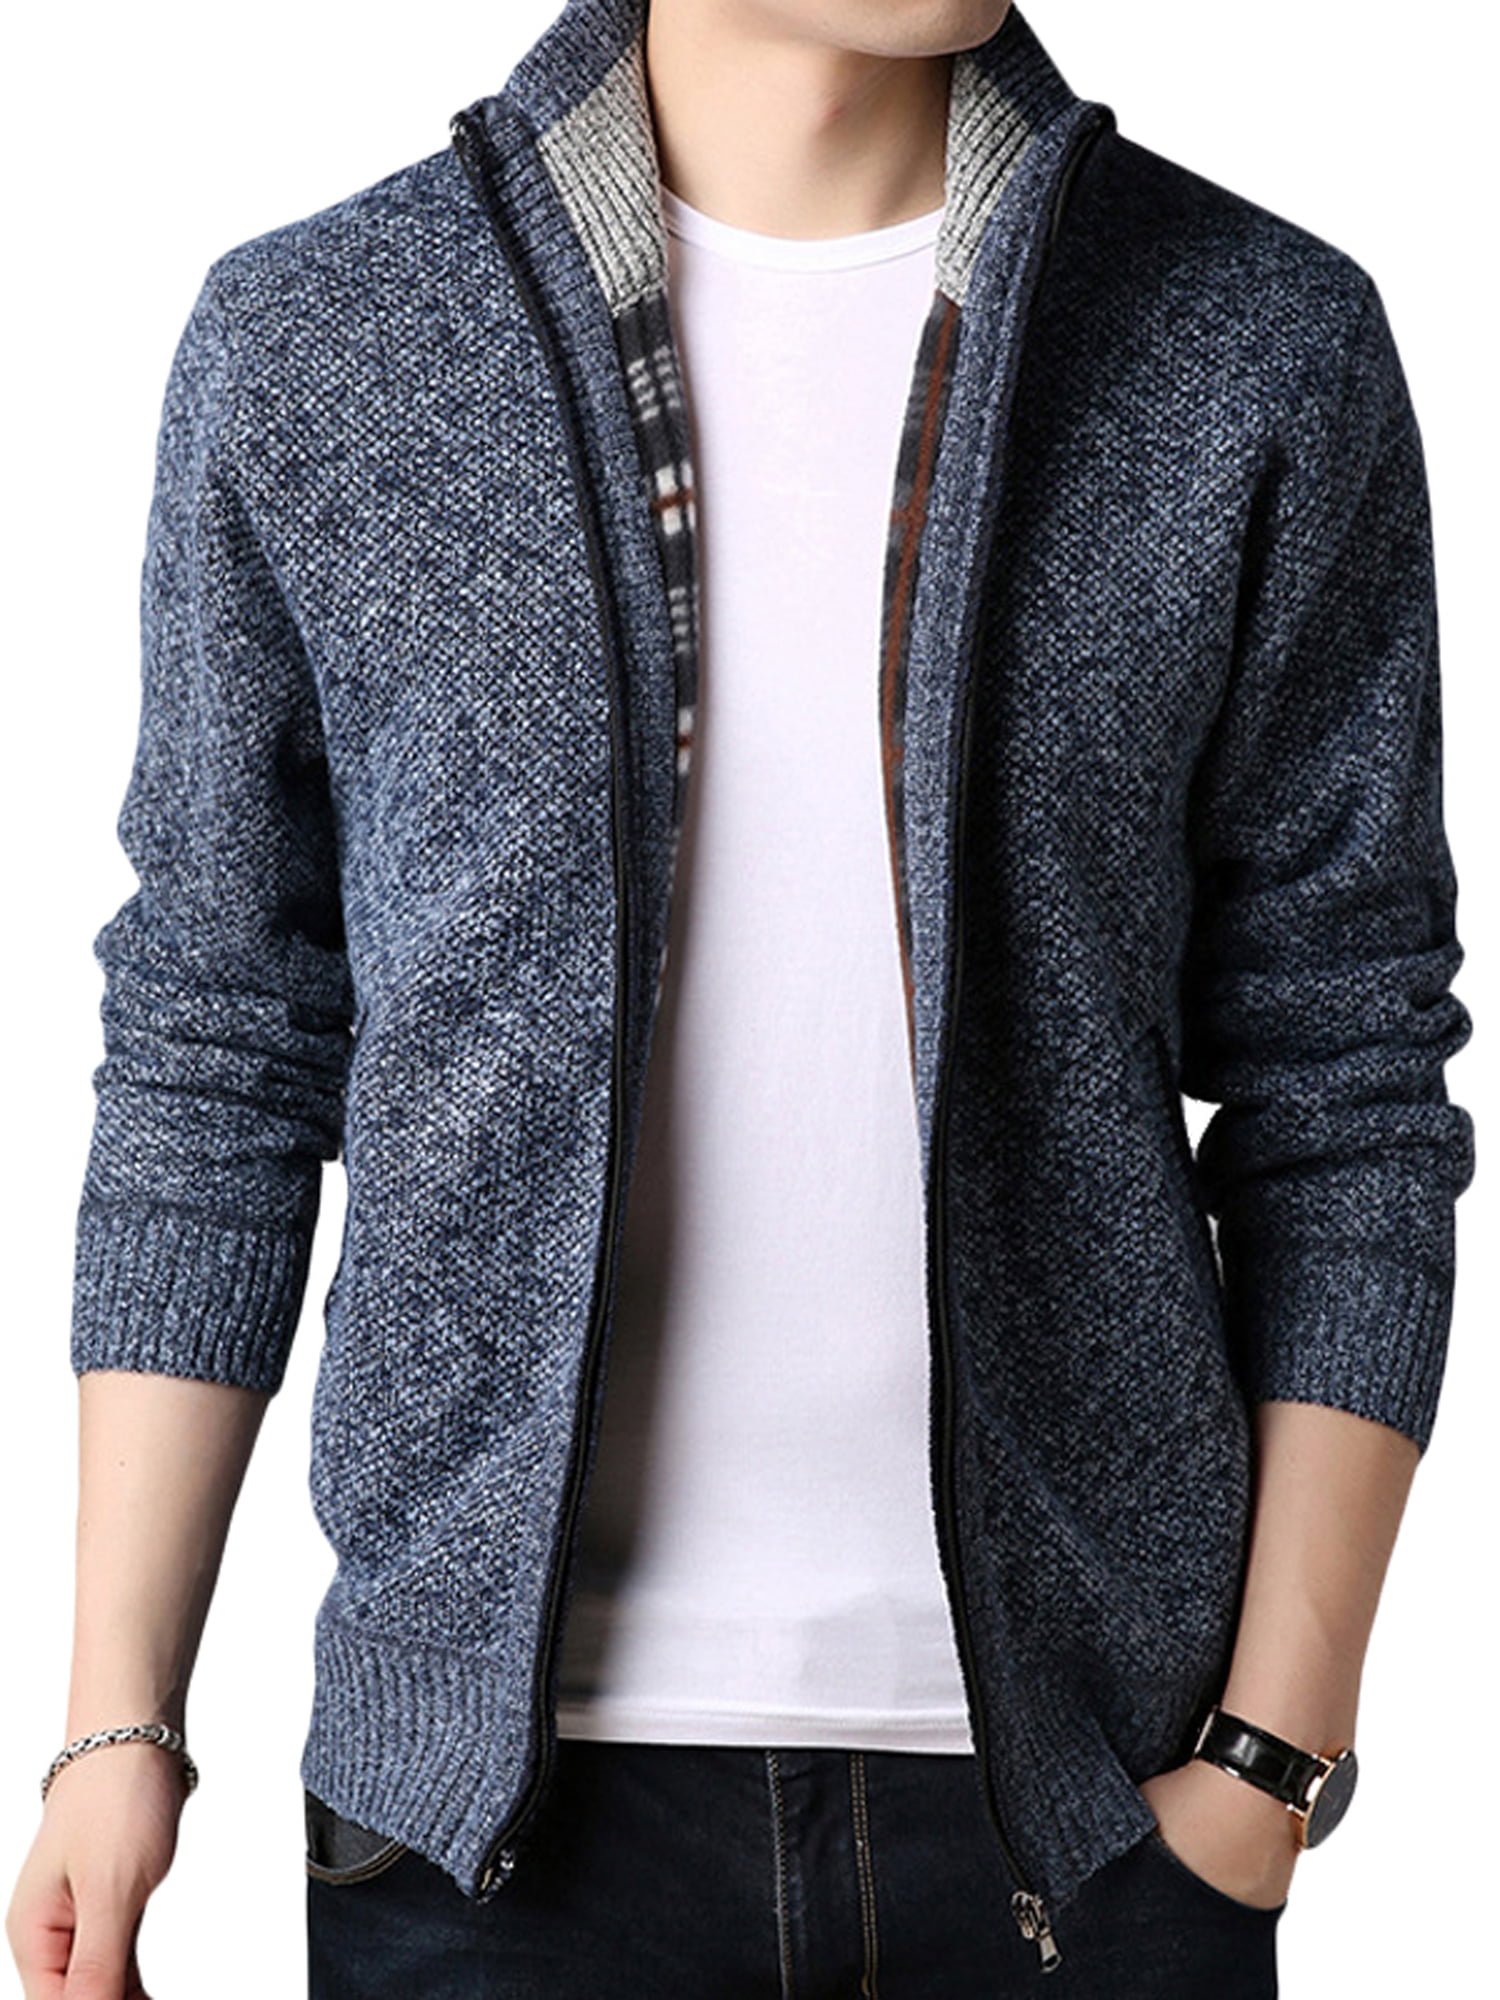 Sweater Jacket Clothing Mens Clothing Jumpers Cardigans Heavy Wool Outdoor Sweater Hand Knit Vintage Sweater Zip-Up Cardigan Vintage Men's Sweater 